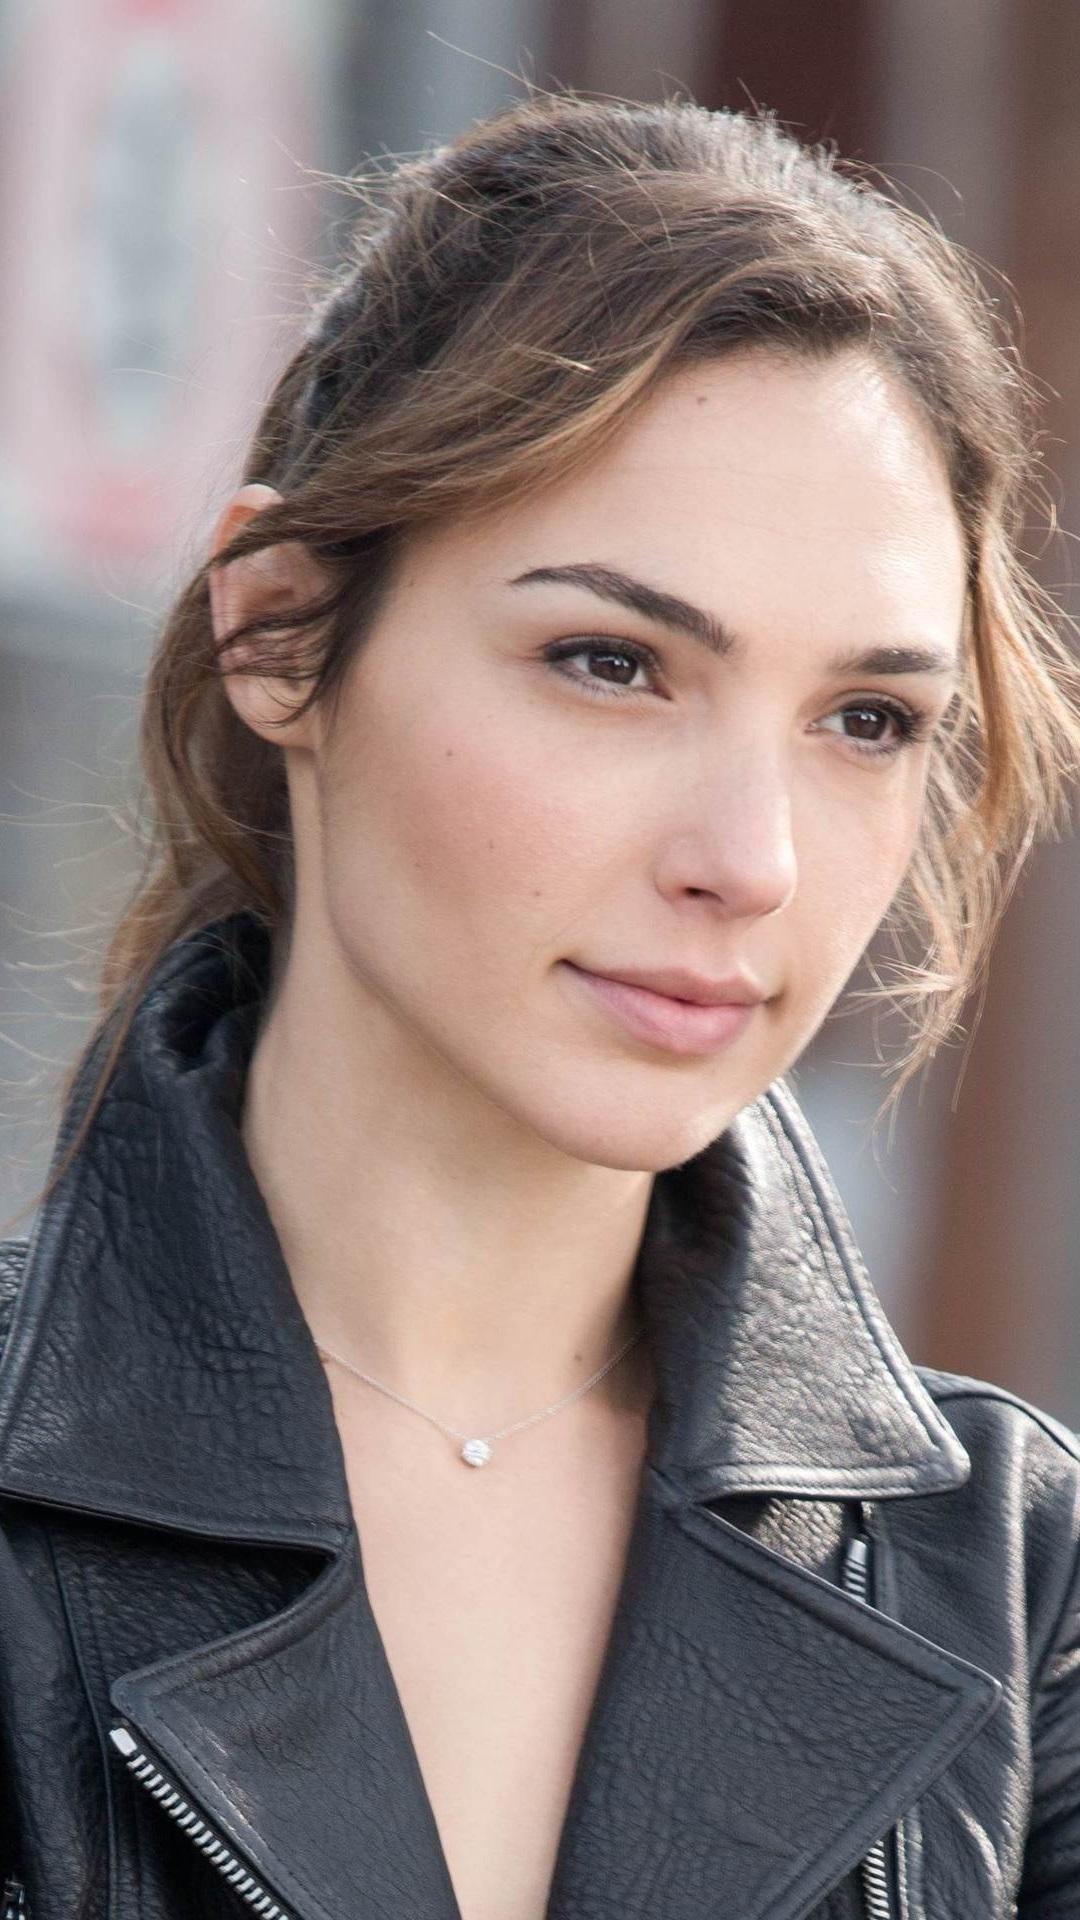 Gal Gadot 03 1080x1920 IPhone 8 7 6 6S Plus Wallpaper, Background, Picture, Image